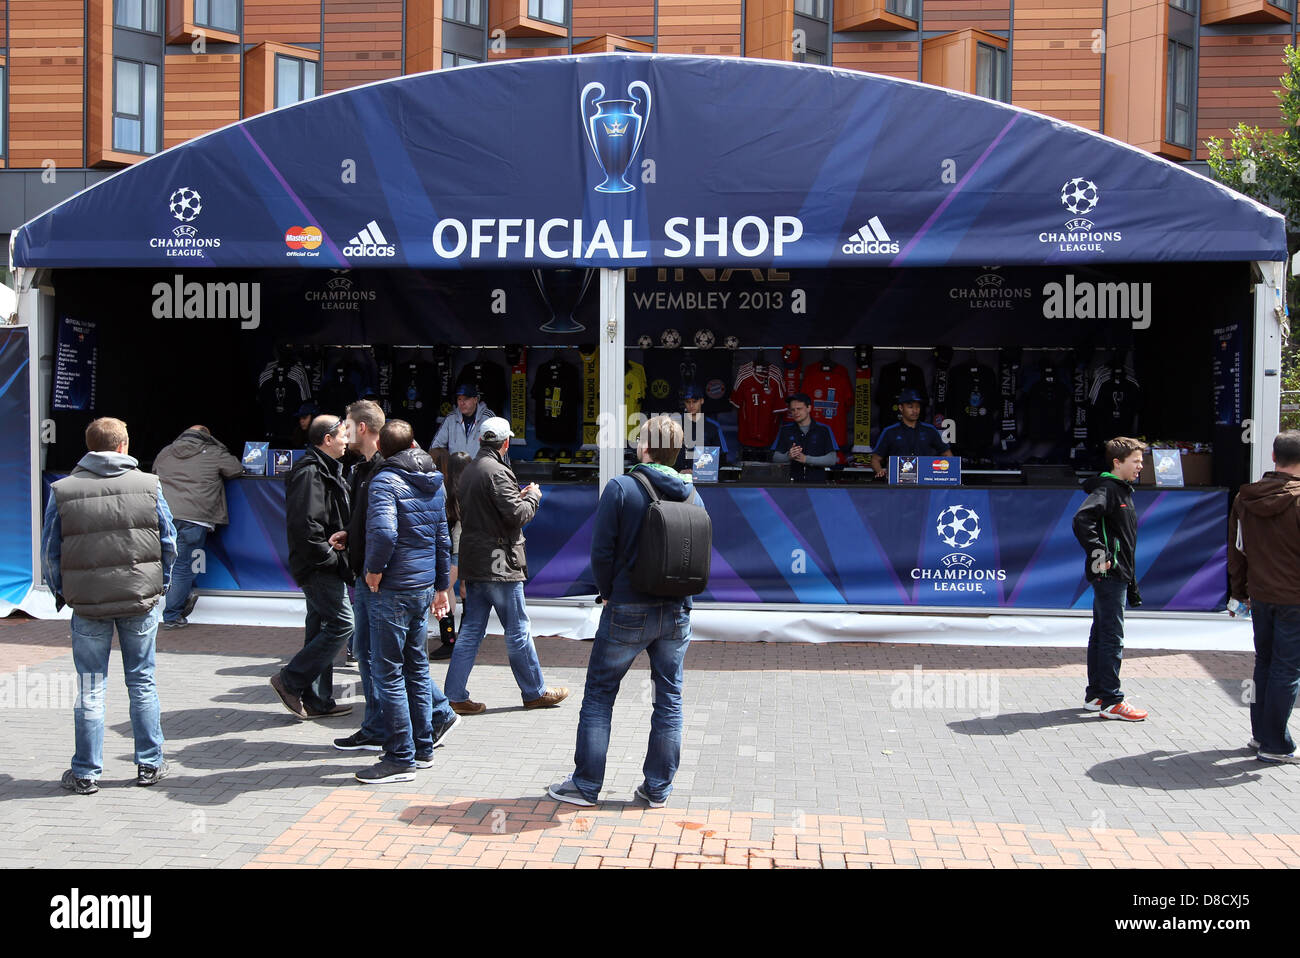 London, UK. 25th May 2013. An official Champions League shop pictured in  front of the Wembley stadium in London, England, 25 May 2013. FC Bayern  will play in the Champions League final